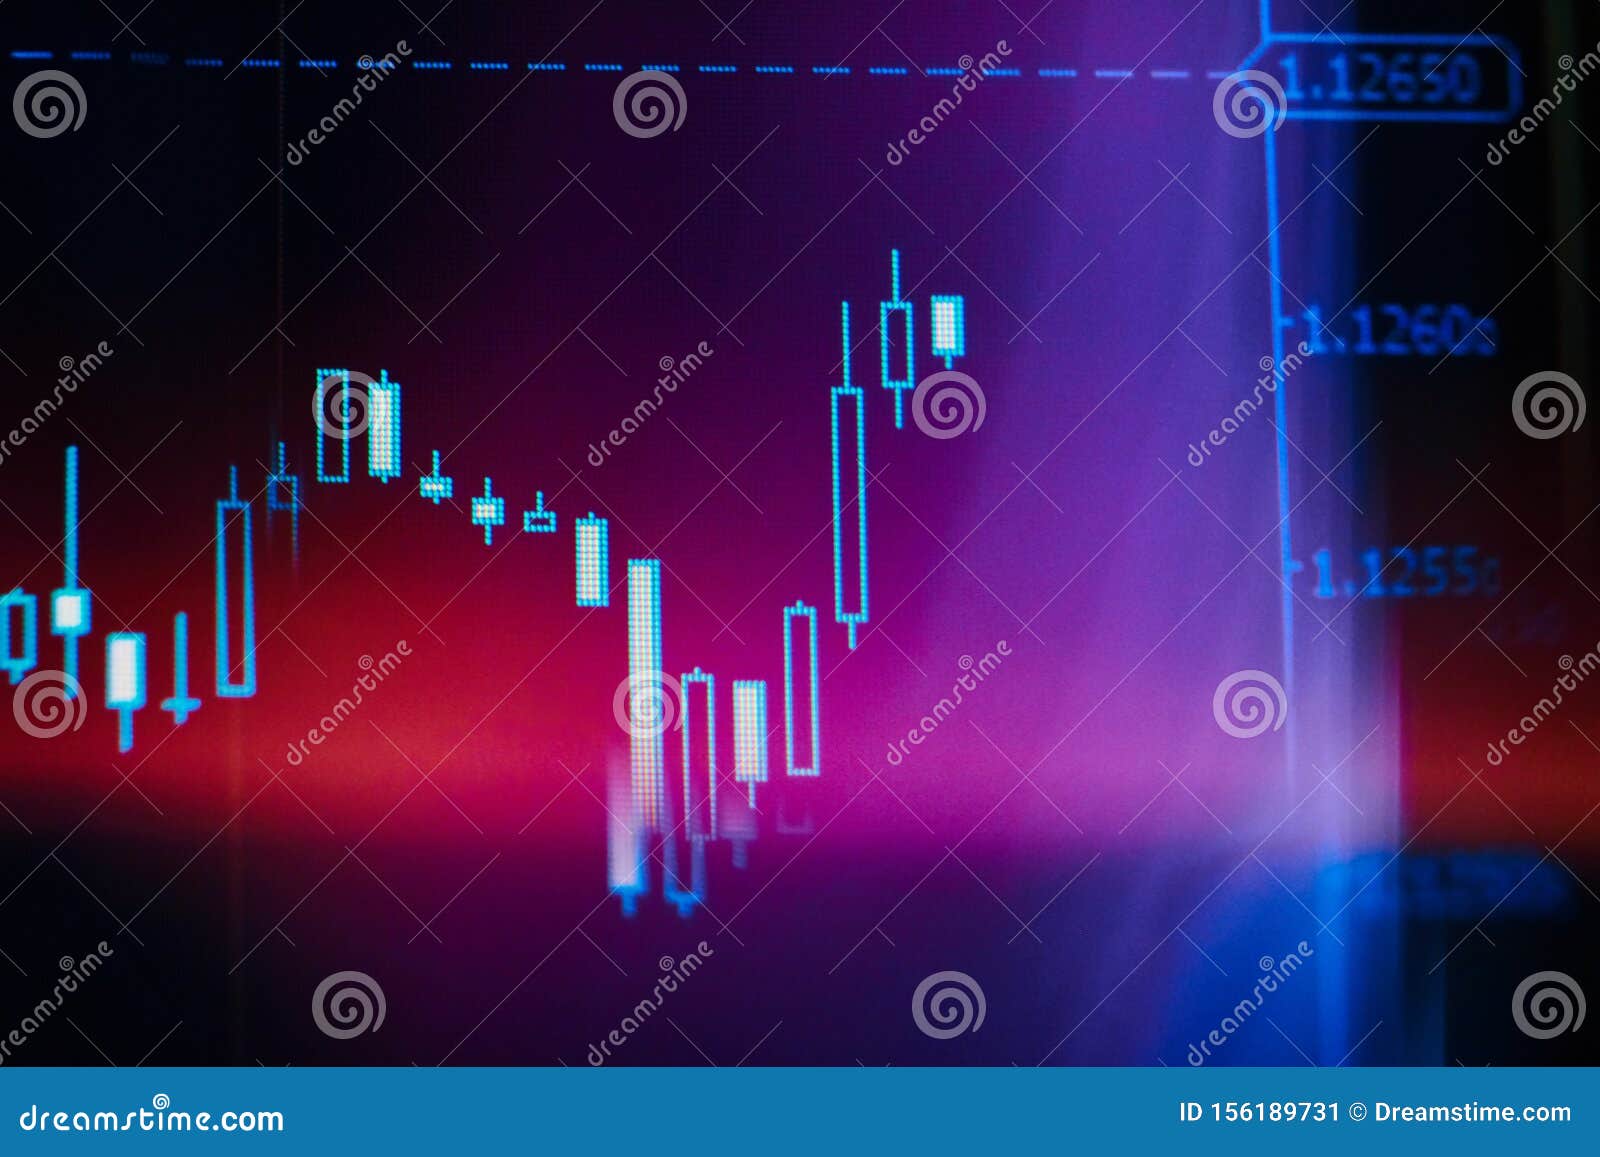 screenshot of a financial chart with color effects